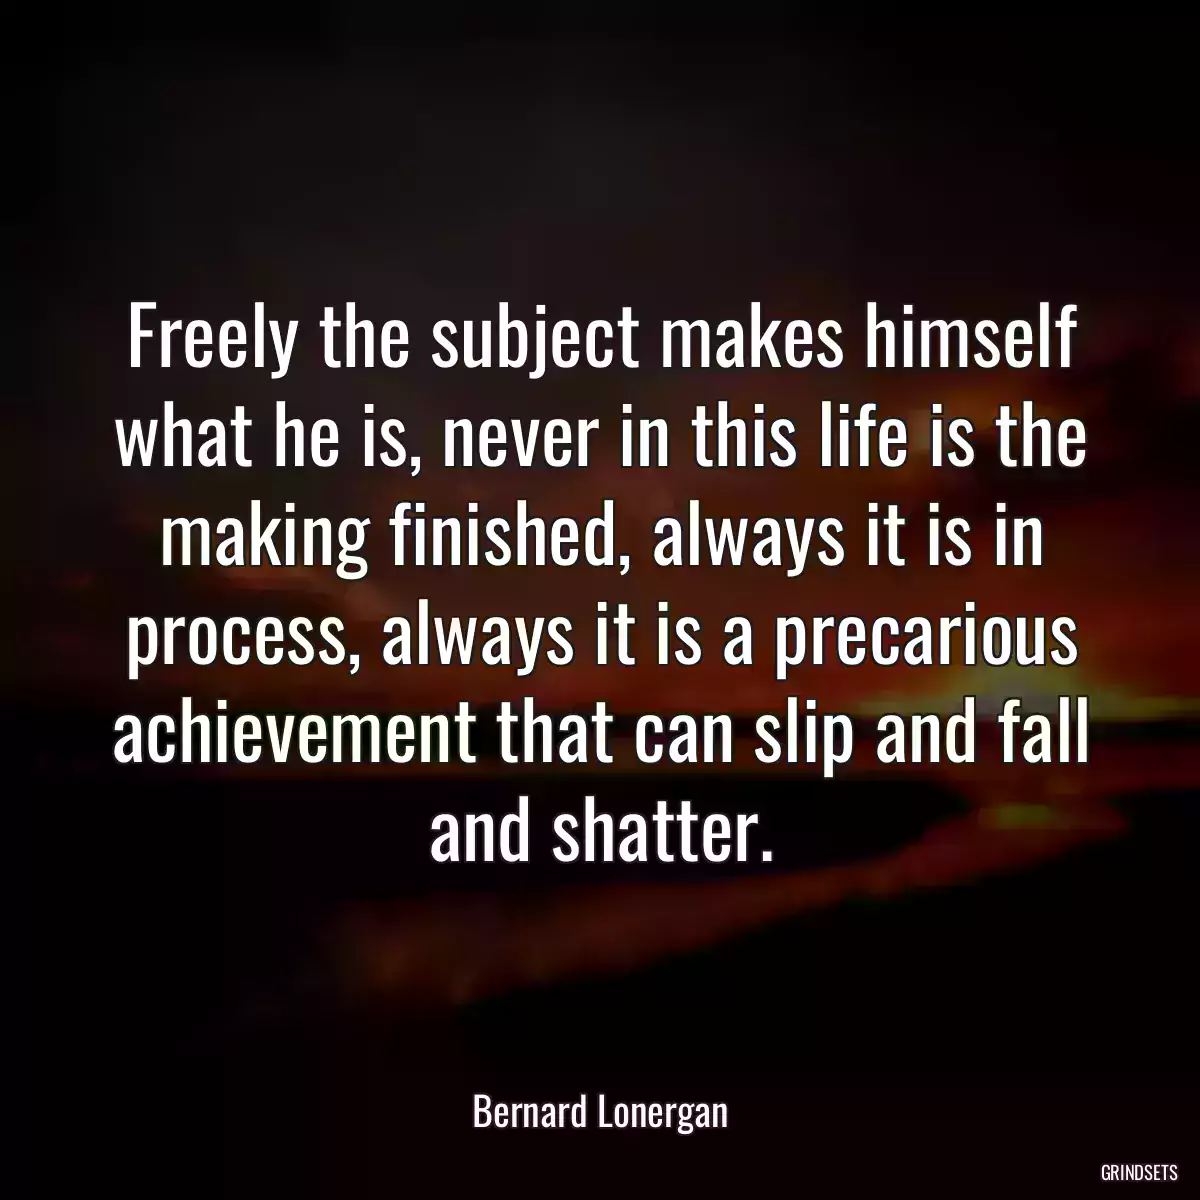 Freely the subject makes himself what he is, never in this life is the making finished, always it is in process, always it is a precarious achievement that can slip and fall and shatter.